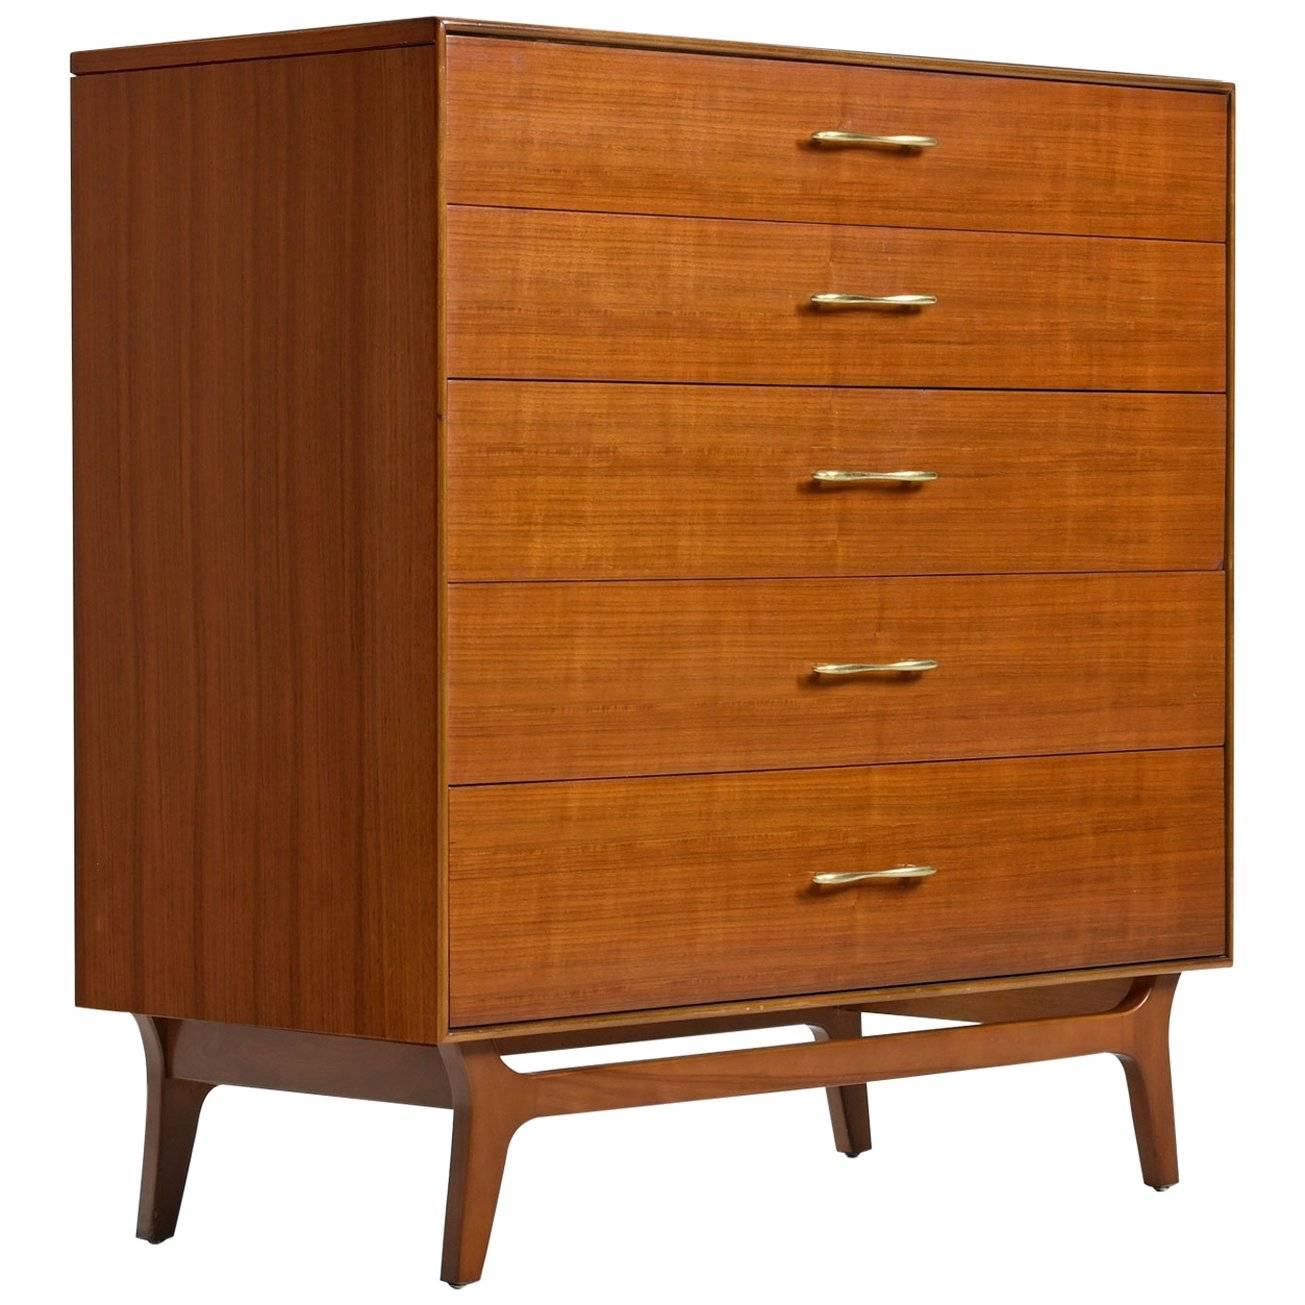 This Mid-Century Modern five-drawer dresser by Rway features expert craftsmanship and spectacular walnut wood. The dresser comes with a piece of polished white stone to accent and protect the top surface. Place perfume bottles, drinks and toiletries